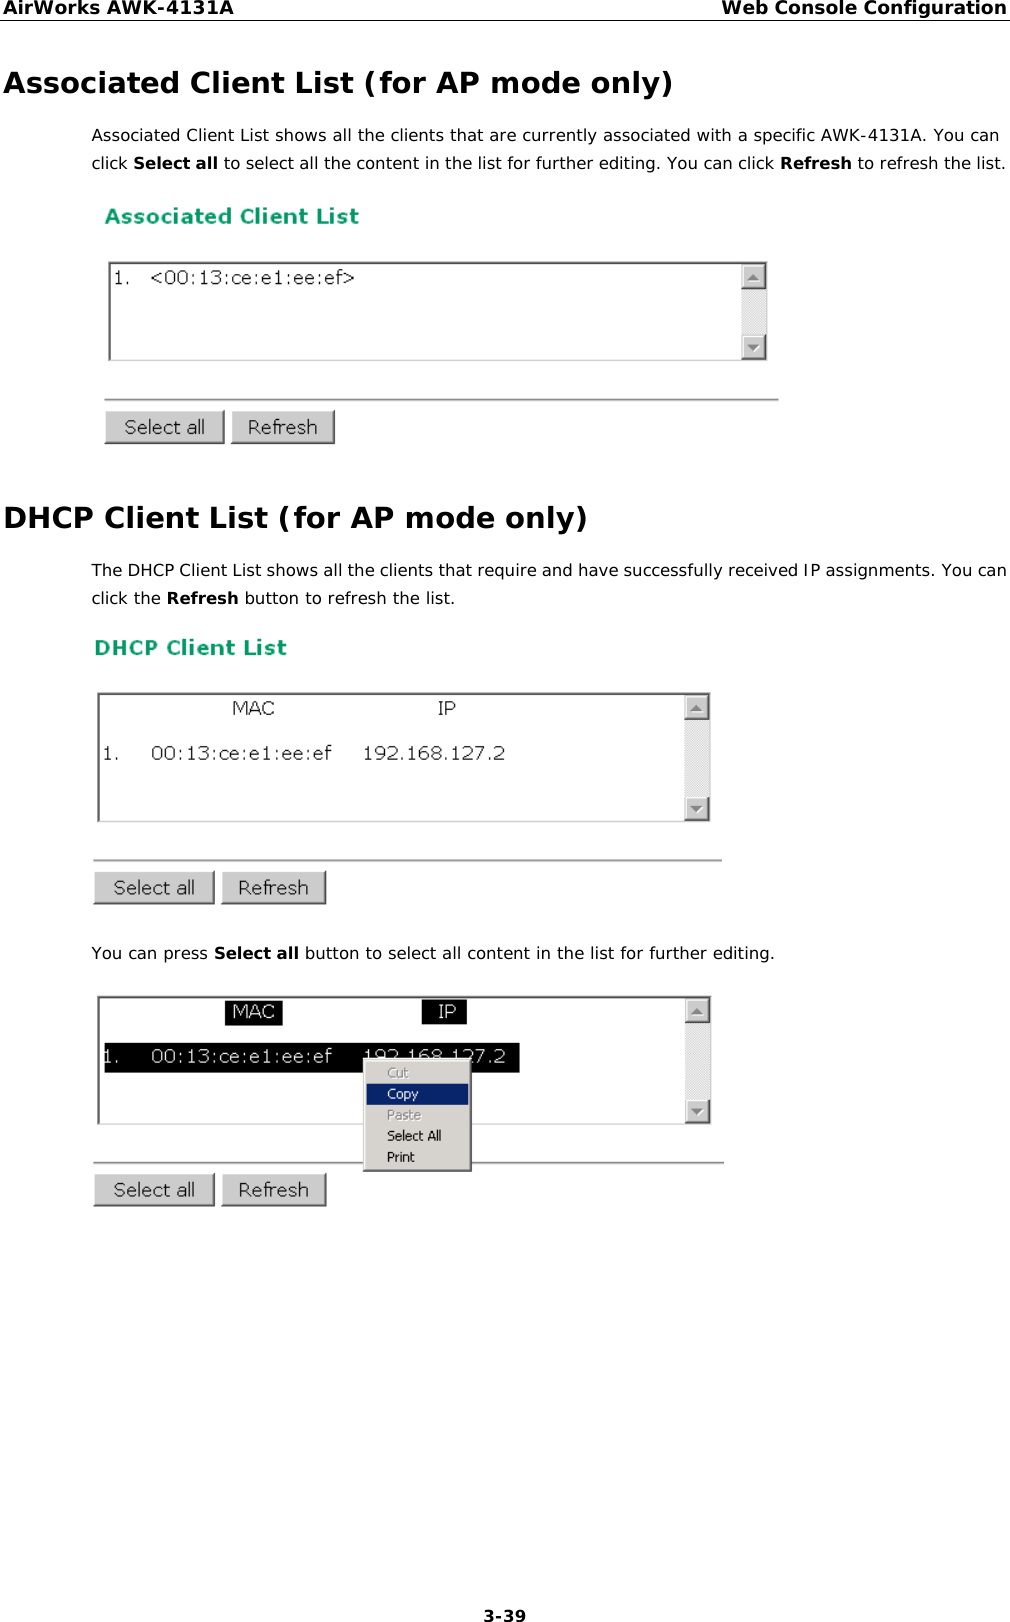 AirWorks AWK-4131A Web Console Configuration  3-39 Associated Client List (for AP mode only) Associated Client List shows all the clients that are currently associated with a specific AWK-4131A. You can click Select all to select all the content in the list for further editing. You can click Refresh to refresh the list.  DHCP Client List (for AP mode only) The DHCP Client List shows all the clients that require and have successfully received IP assignments. You can click the Refresh button to refresh the list.  You can press Select all button to select all content in the list for further editing.          